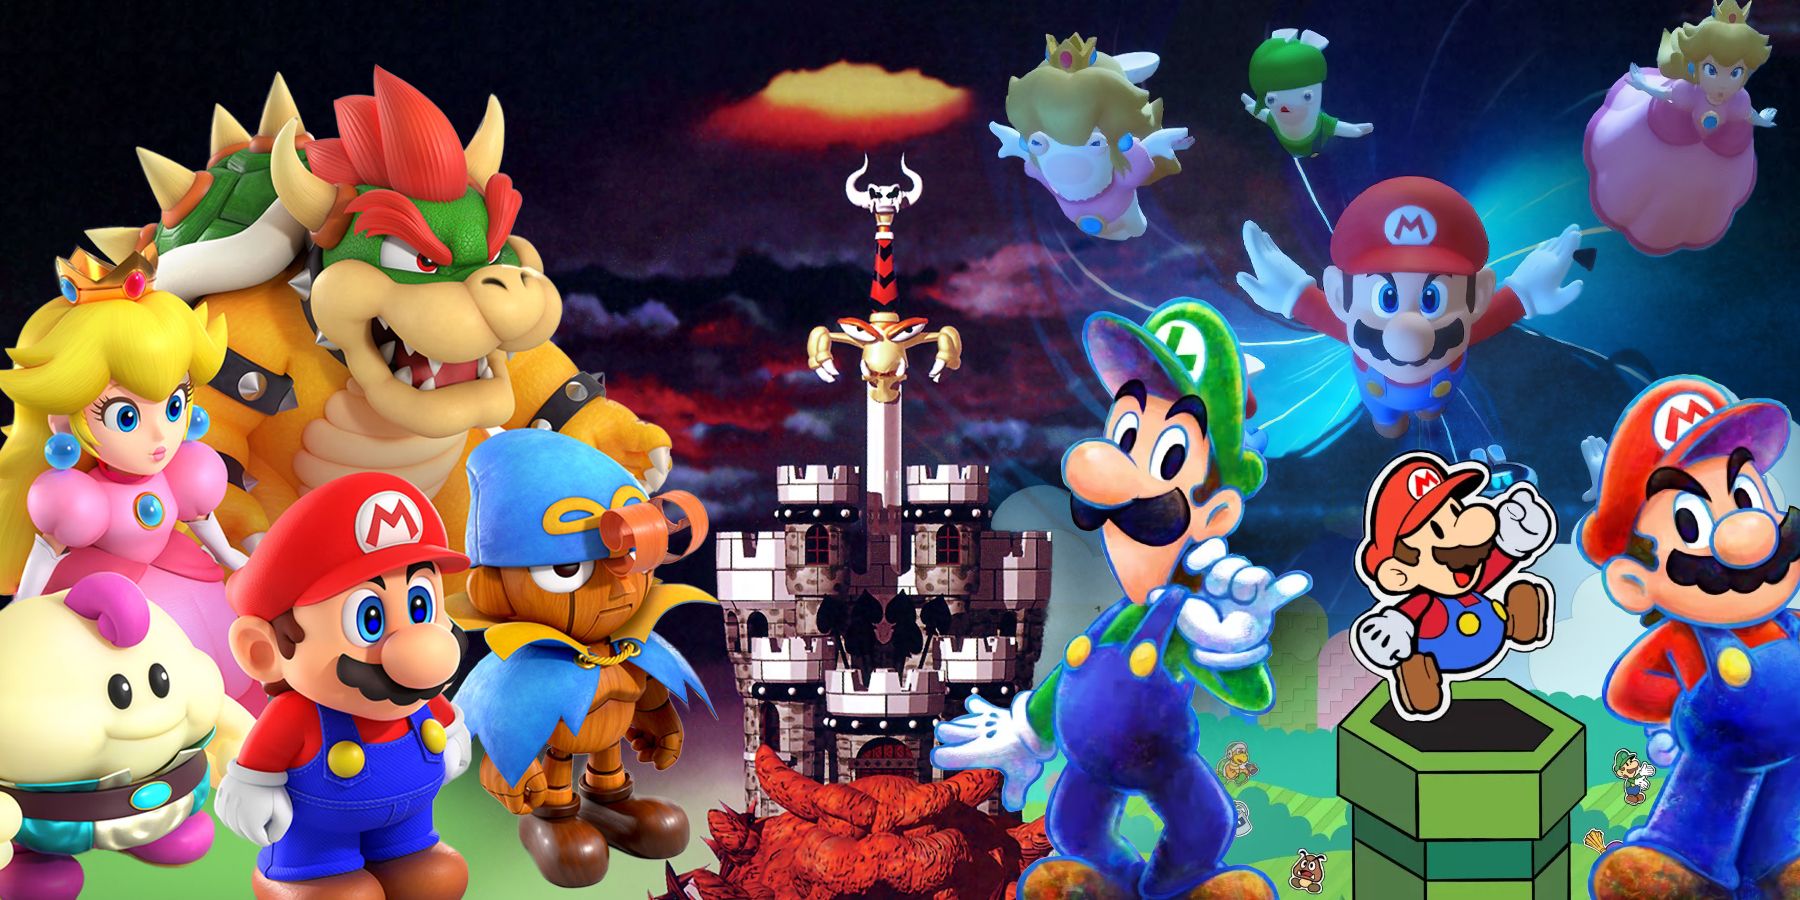 How long is Super Mario RPG?